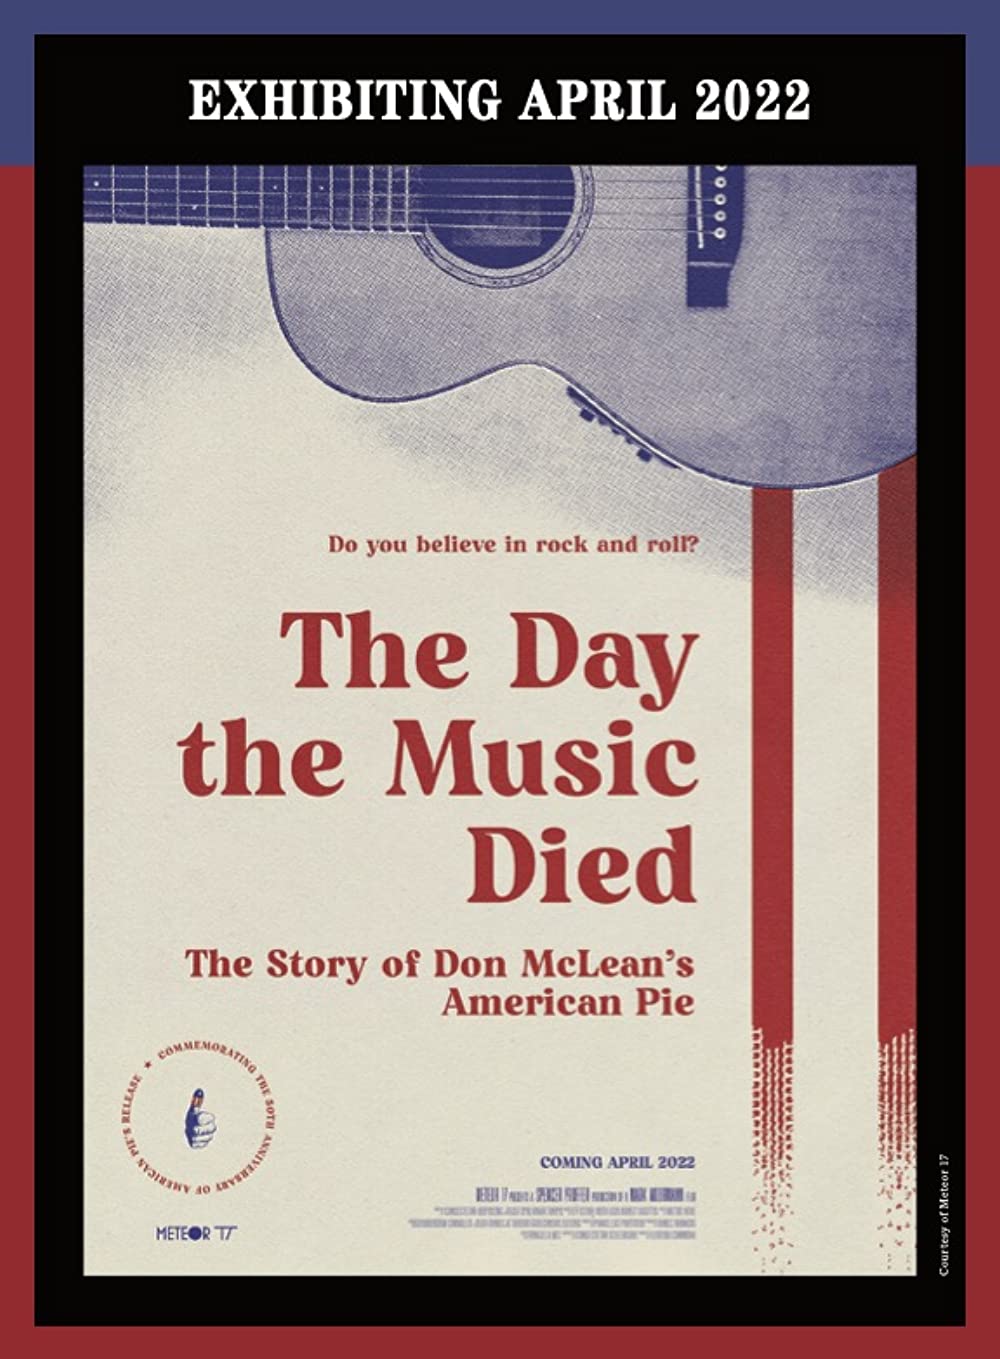  The Day the Music Died: The Story of Don McLean's American Pie